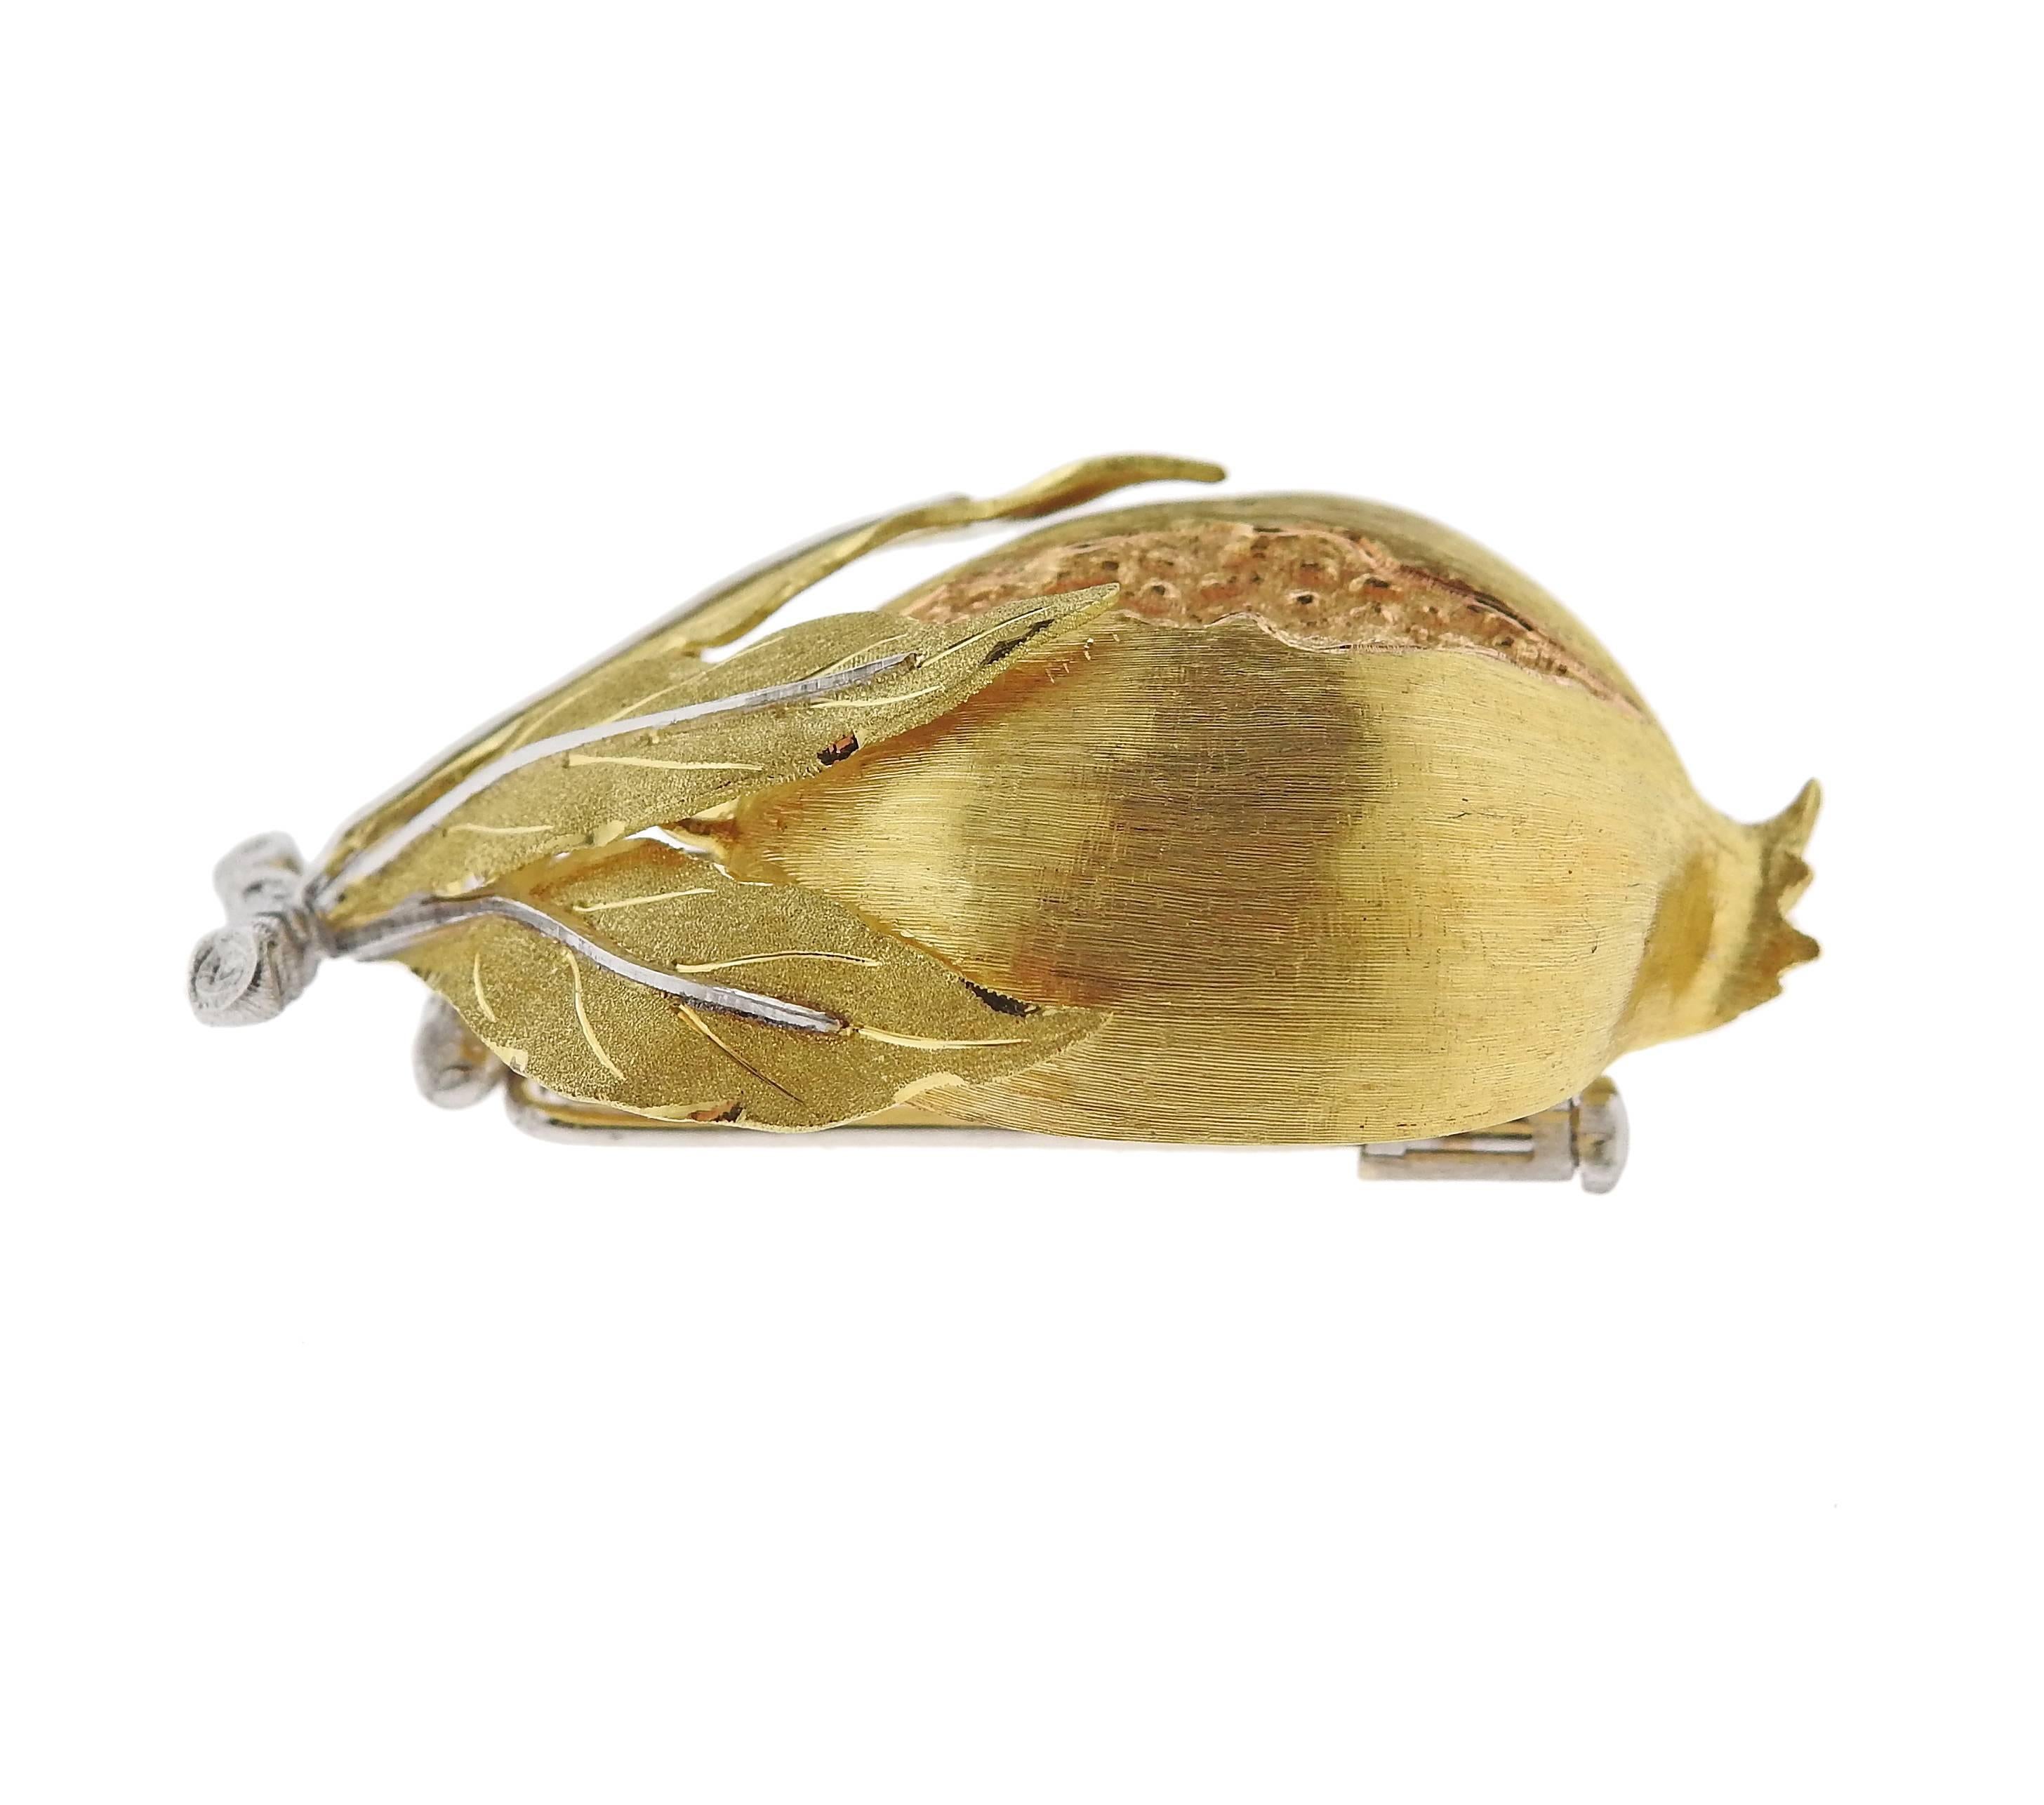 Tri color gold Buccellati pomegranate brooch, measuring 40mm x 26mm, weighs 21.1 grams. Marked: Buccellati, 750, E4100, Italy.
Comes with pouch. Retail $15500.